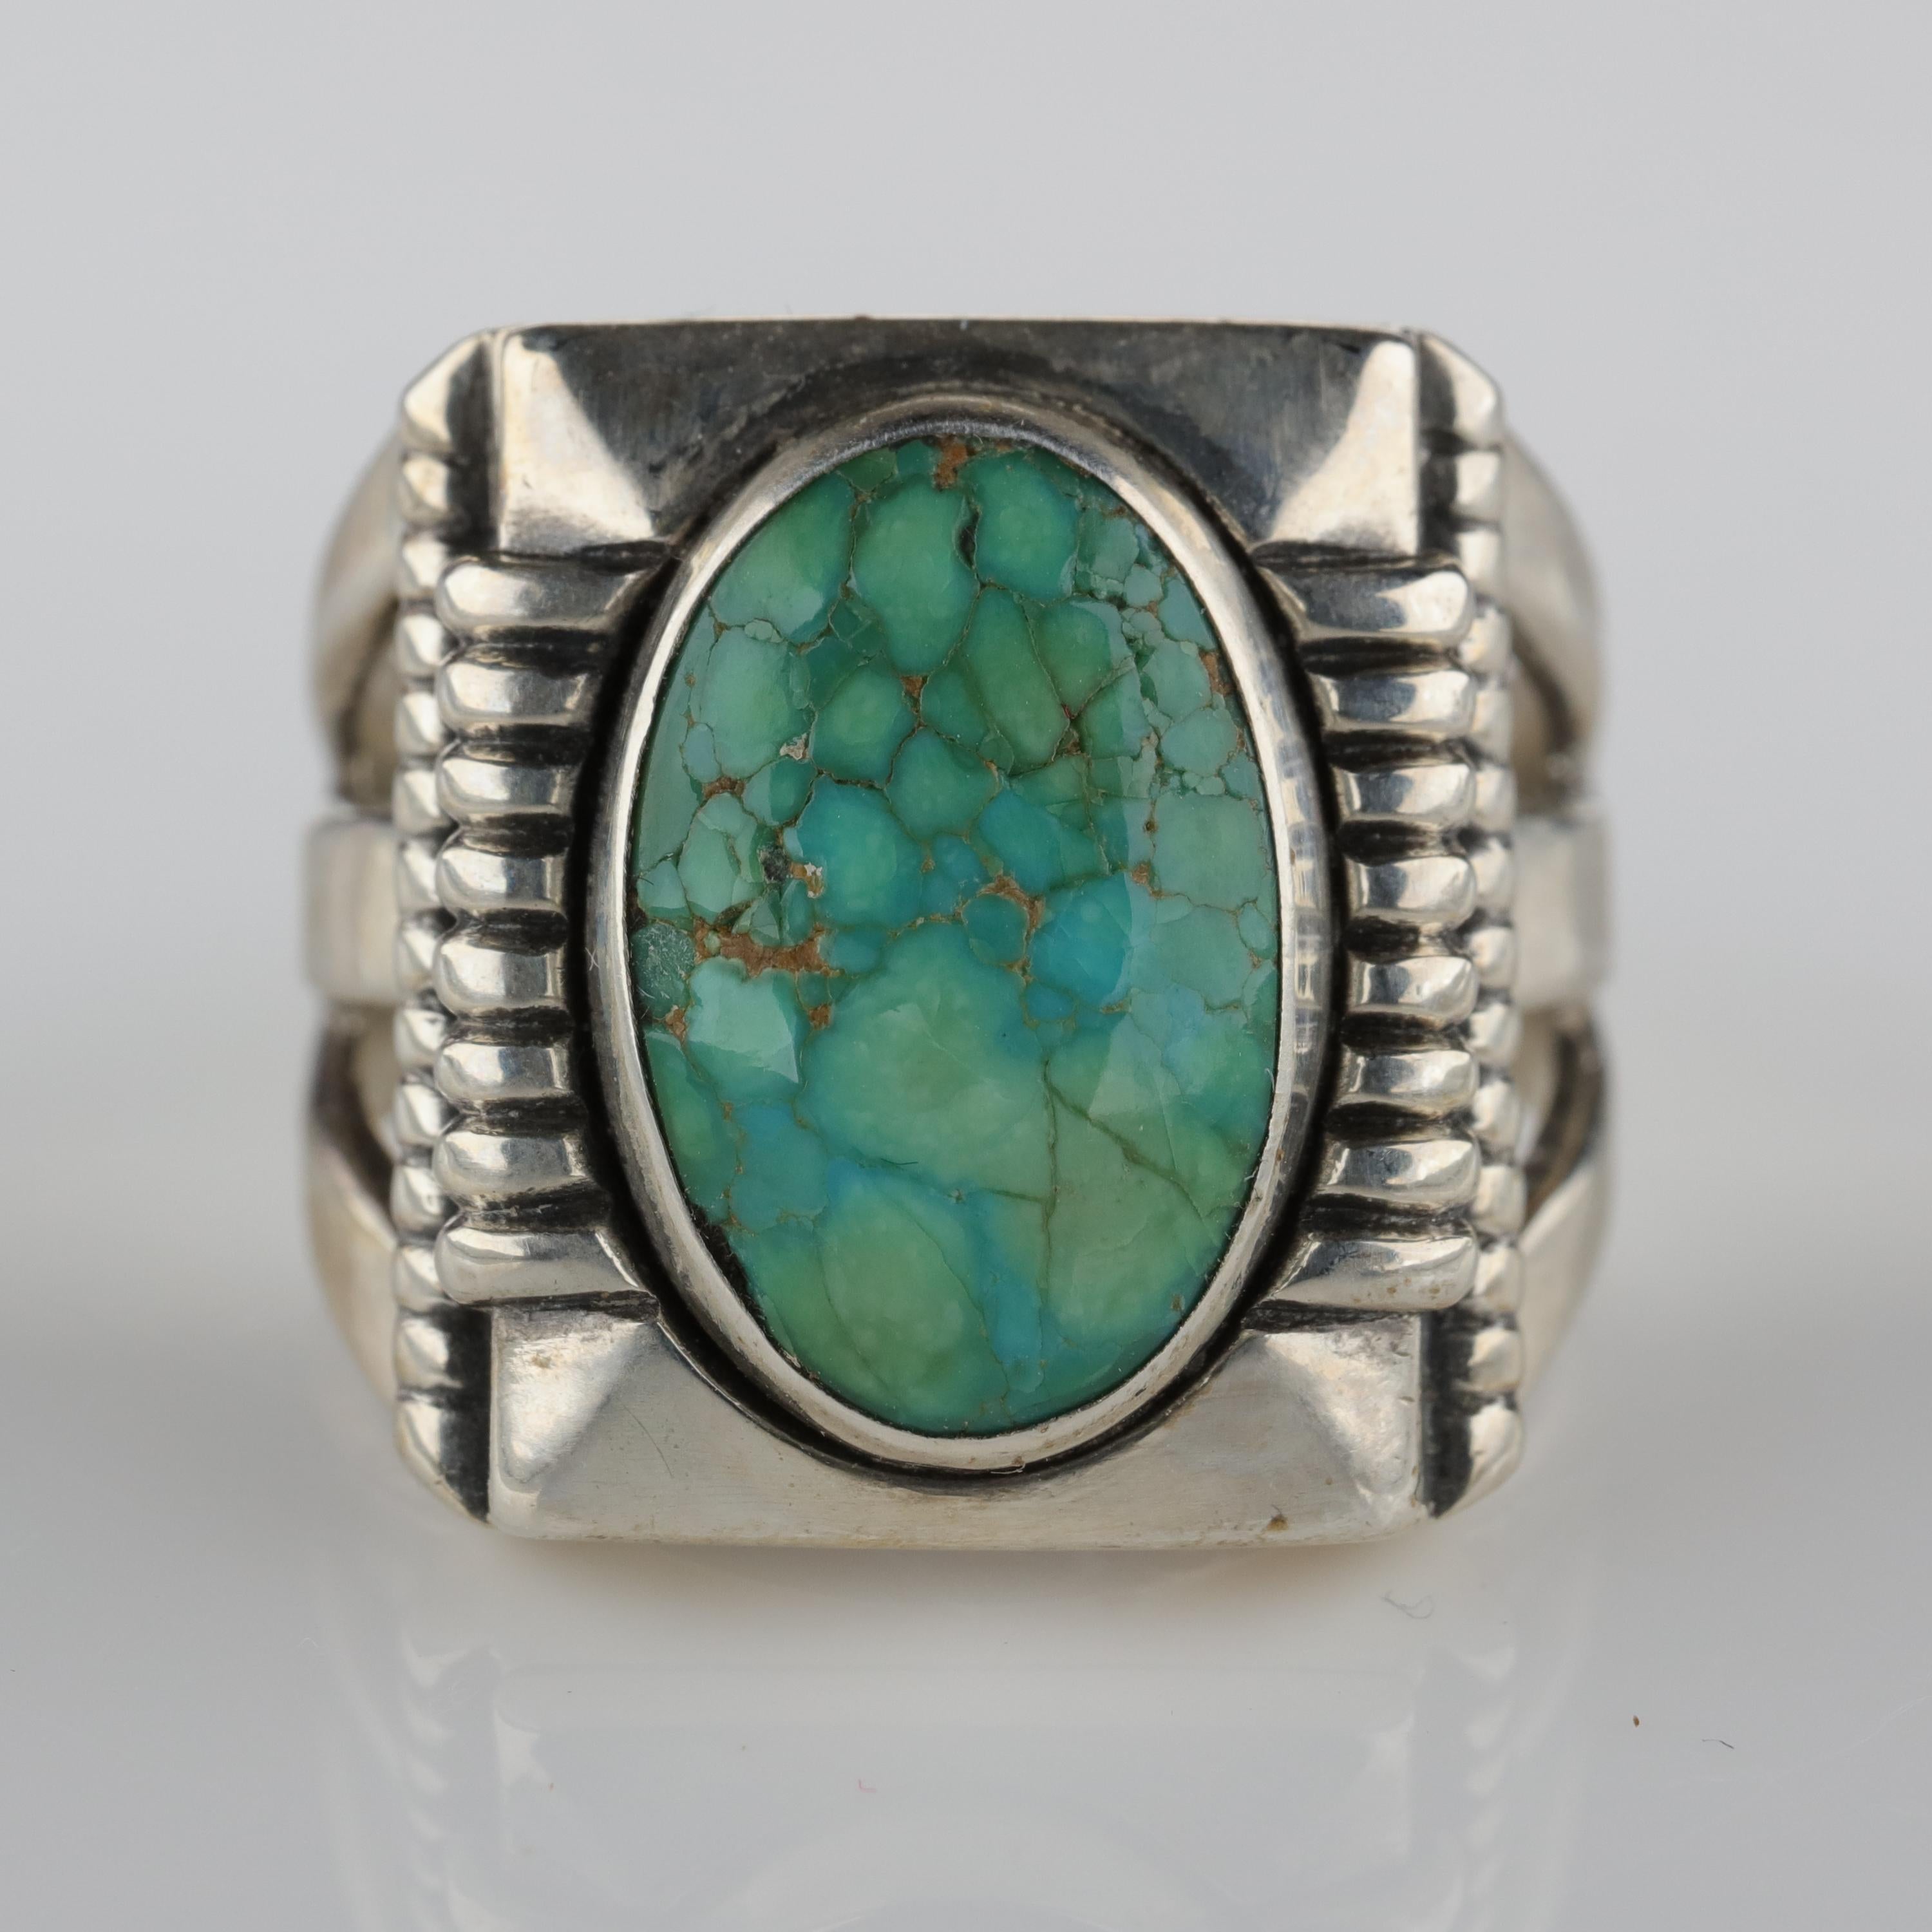 This is one of the more unusual —and beautiful— turquoise and silver rings I have taken into my possession. This circa 1930s Art Deco ring is defined by its strong, graphic lines and elegant tailoring. This exceptionally well-crafted ring holds a